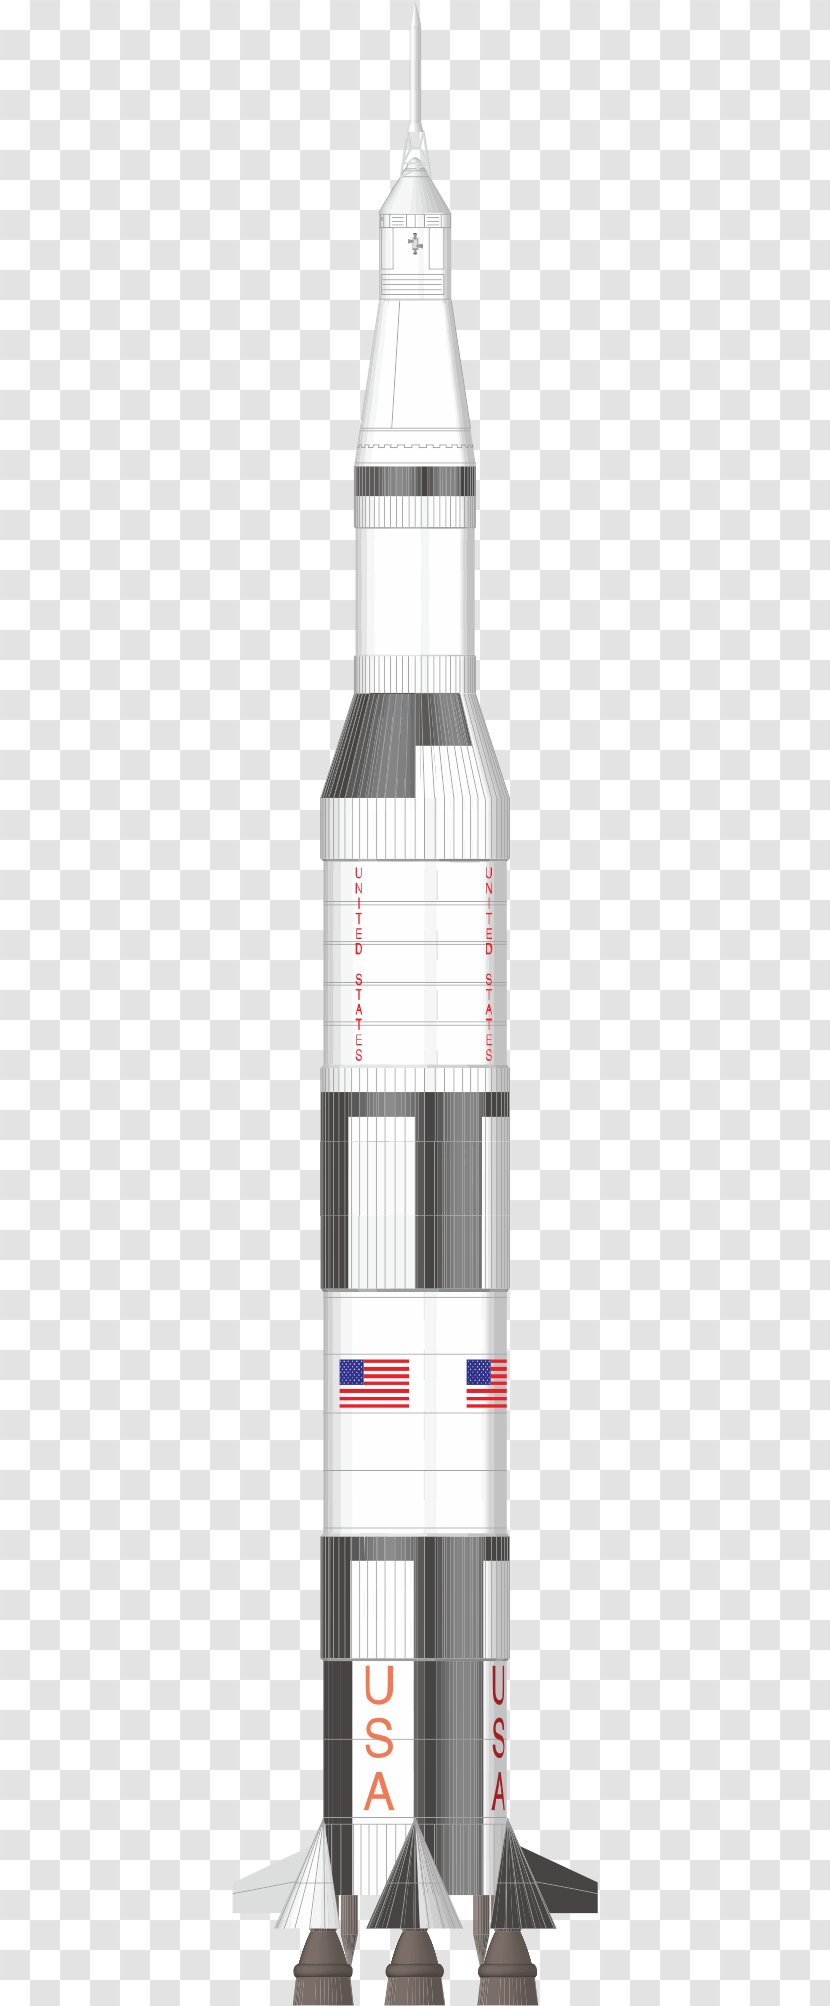 Apollo Program Space Shuttle Saturn V Shuttle-Derived Launch Vehicle - Ares I - An Erect Ship Transparent PNG